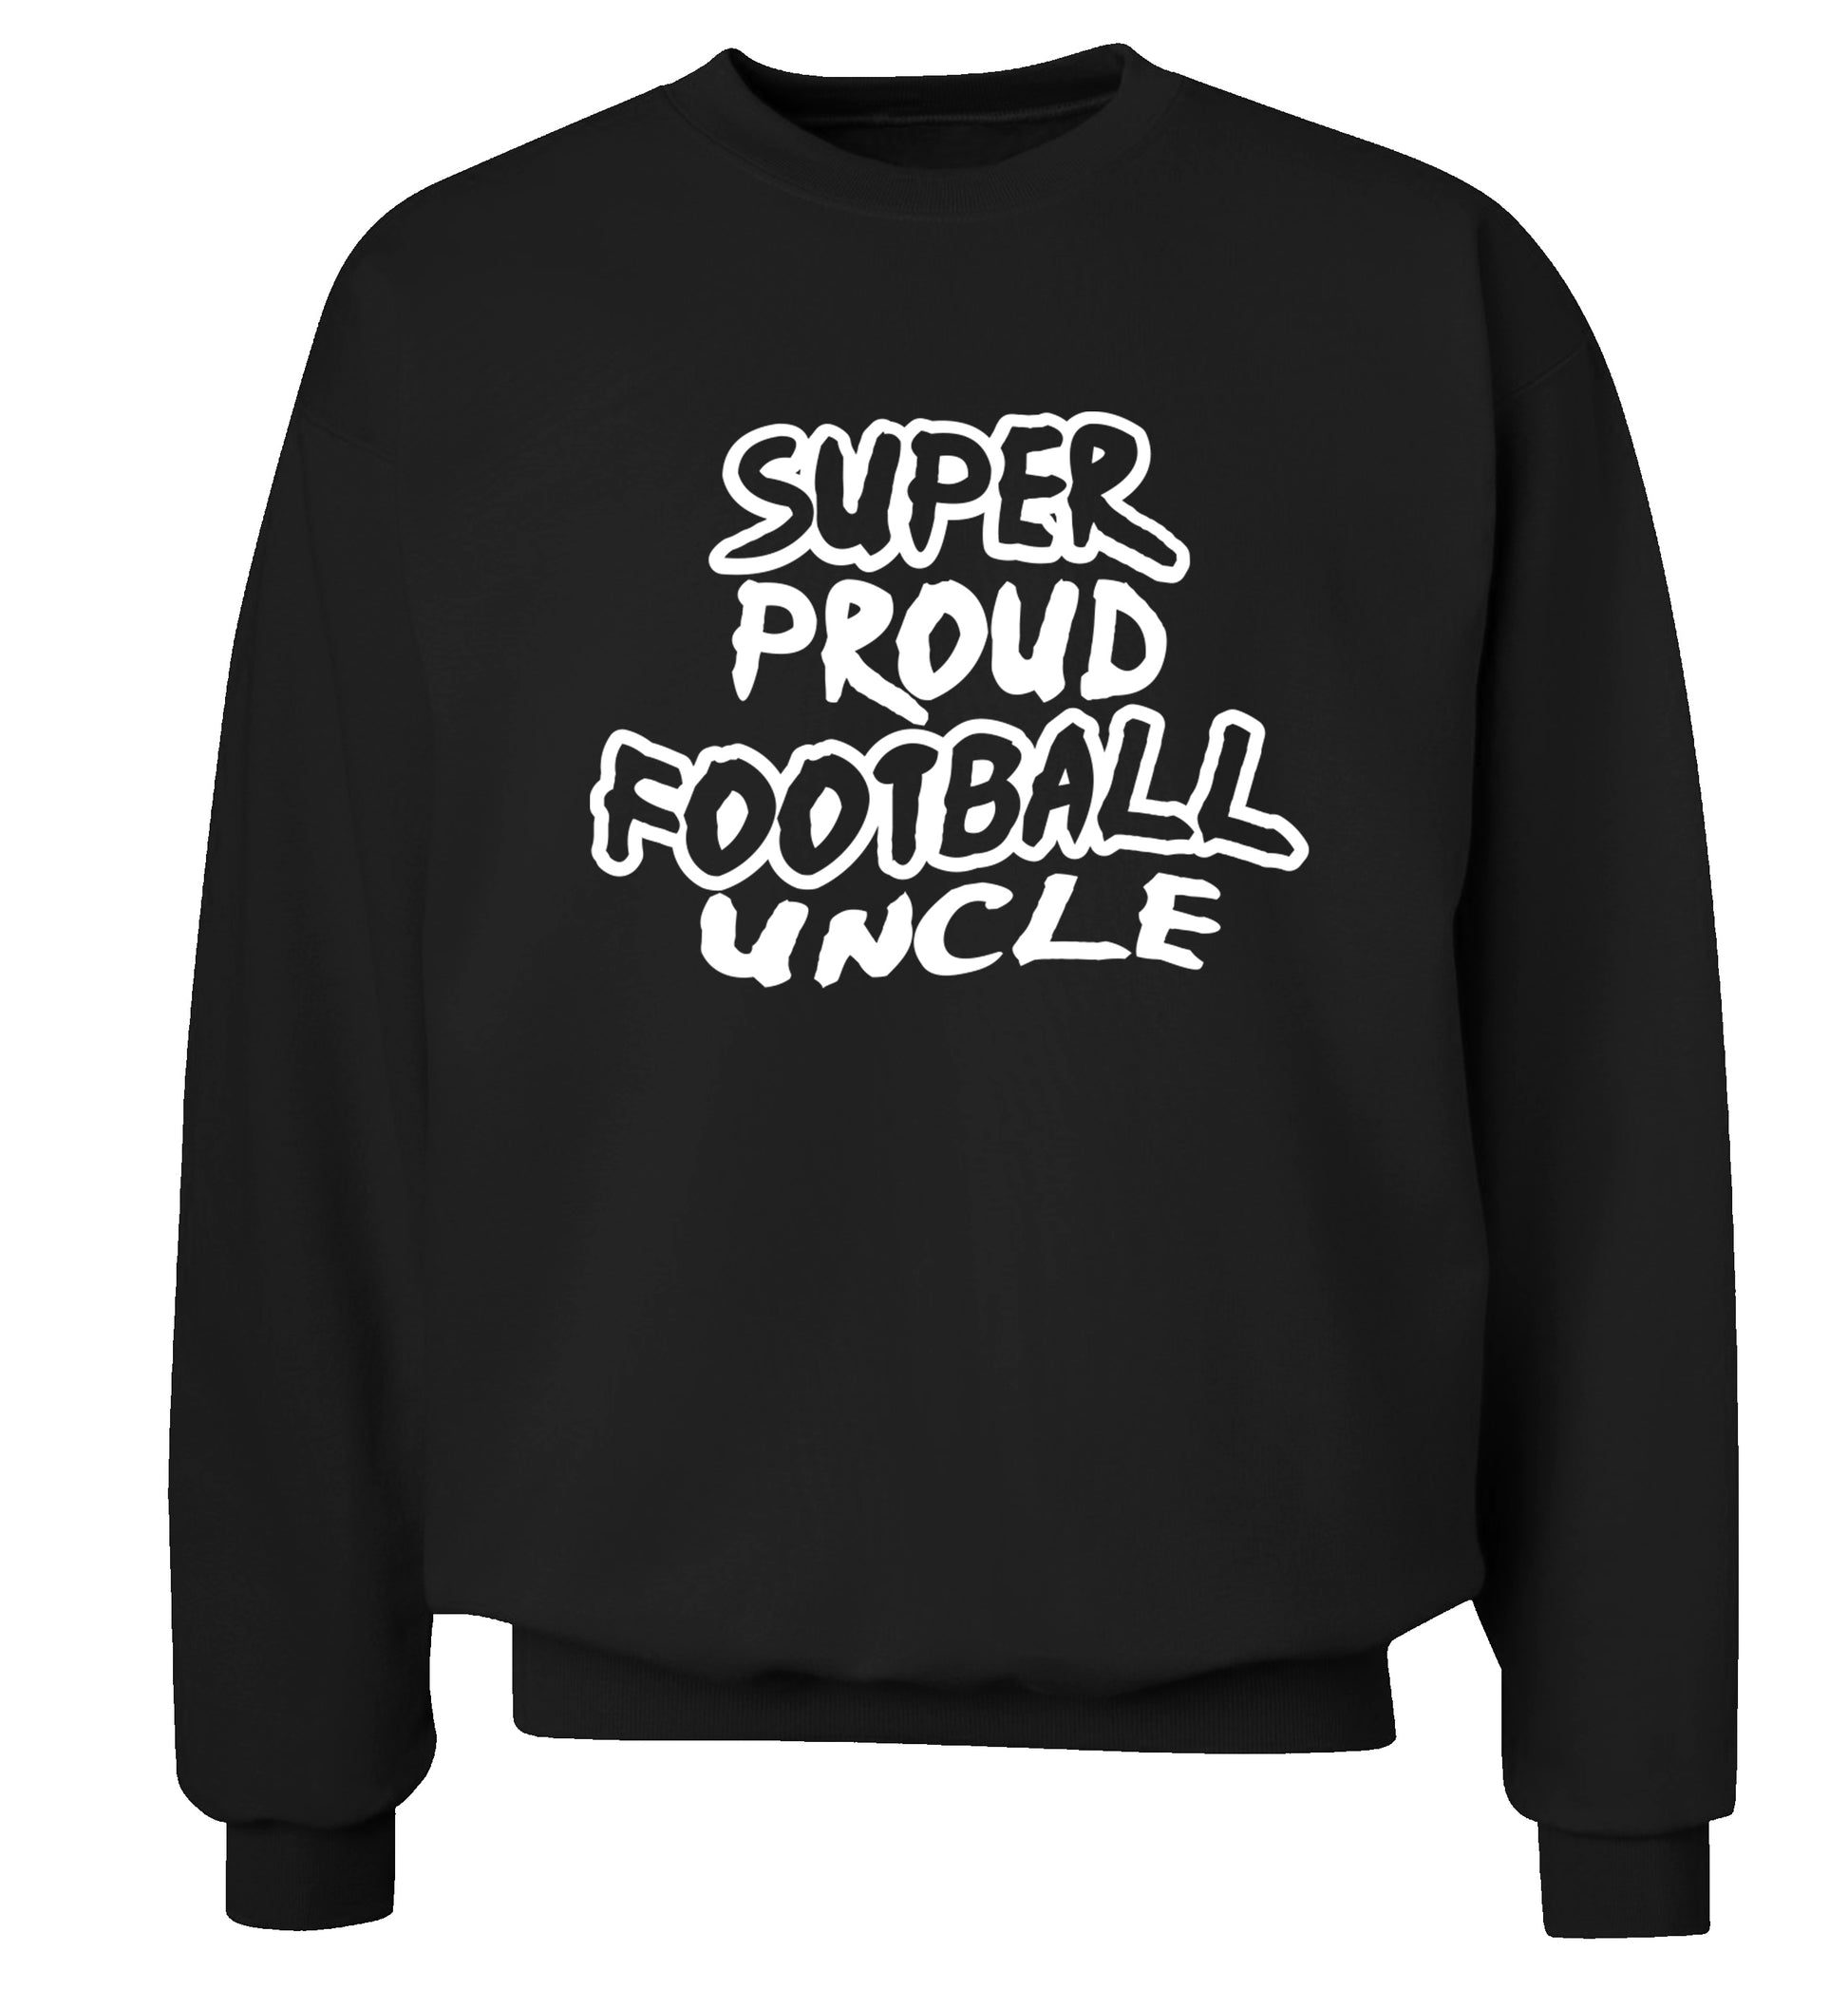 Super proud football uncle Adult's unisexblack Sweater 2XL